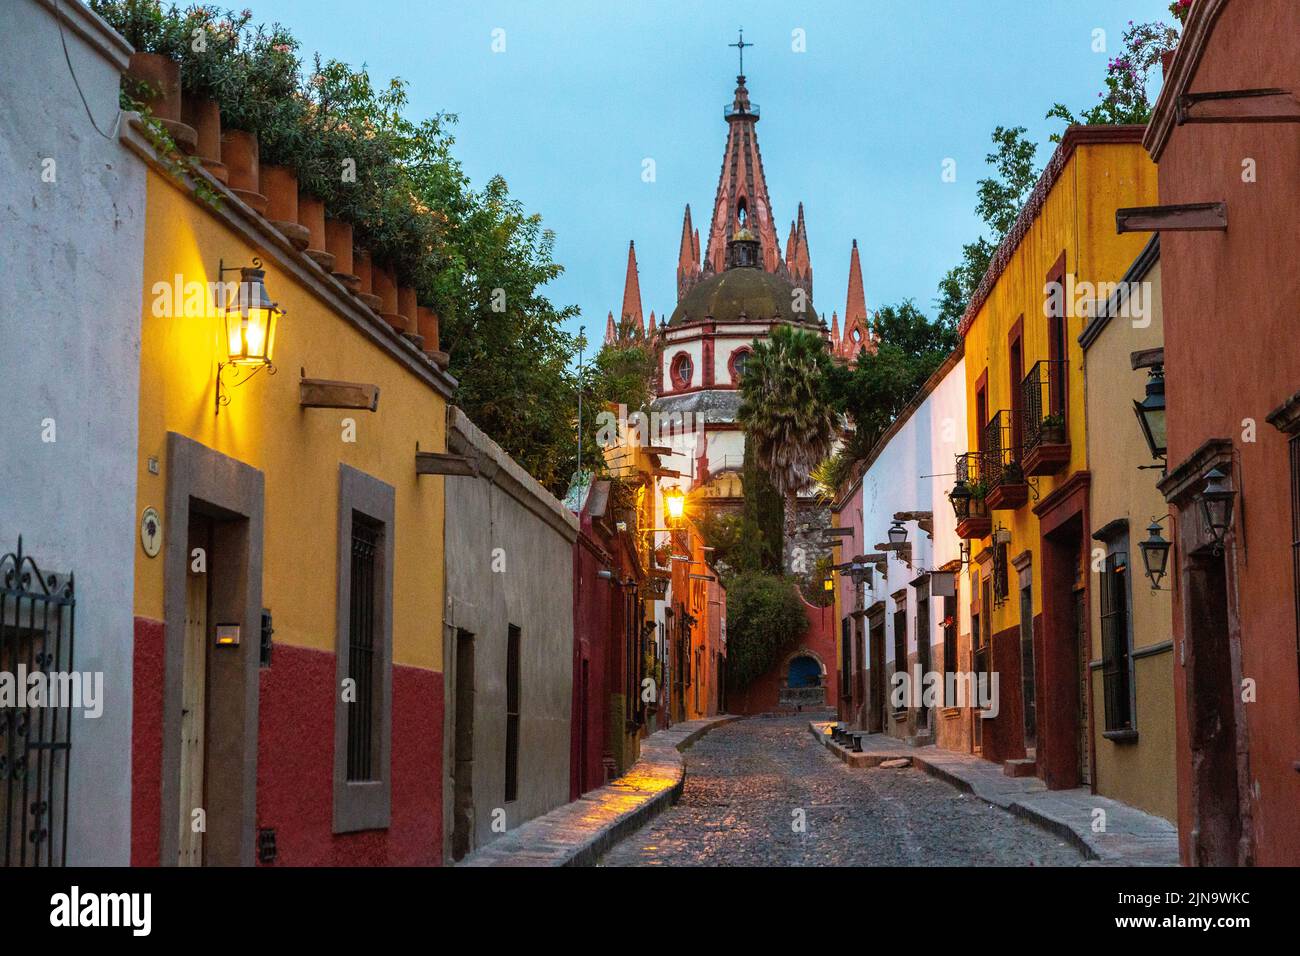 Early morning view of the cobblestone Calle Aldama of the original barque tower of Parroquia de San Miguel Arcangel in the historic city center of San Miguel de Allende, Mexico. Stock Photo